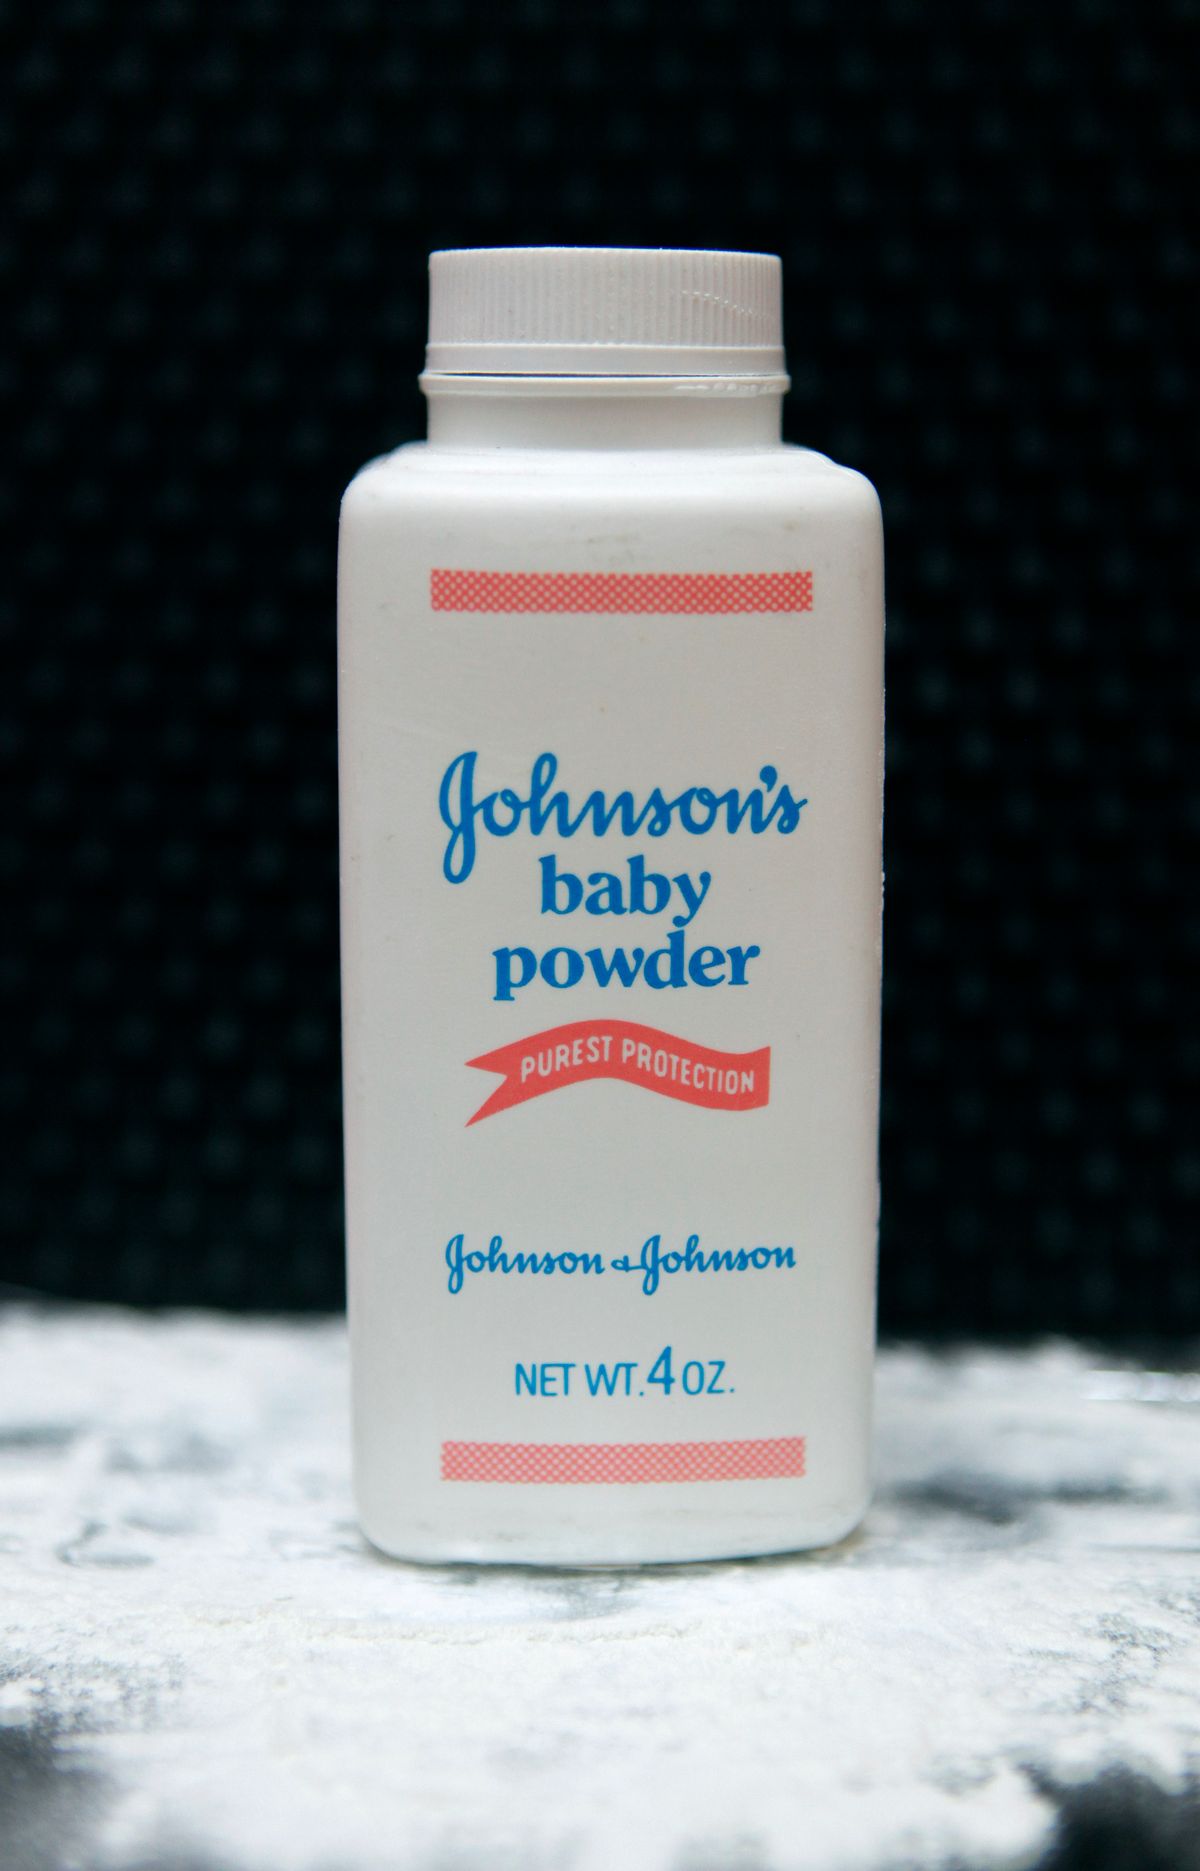 FILE - In this April 15, 2011 file photo, a bottle of Johnson's baby powder is displayed in San Francisco. A St. Louis jury on Thursday, Oct. 27, 2016, awarded a California woman more than $70 million in her lawsuit alleging that years of using Johnson &amp; Johnson's baby powder caused her cancer, the latest case raising concerns about the health ramifications of extended talcum powder use. (AP Photo/Jeff Chiu, File) (AP)